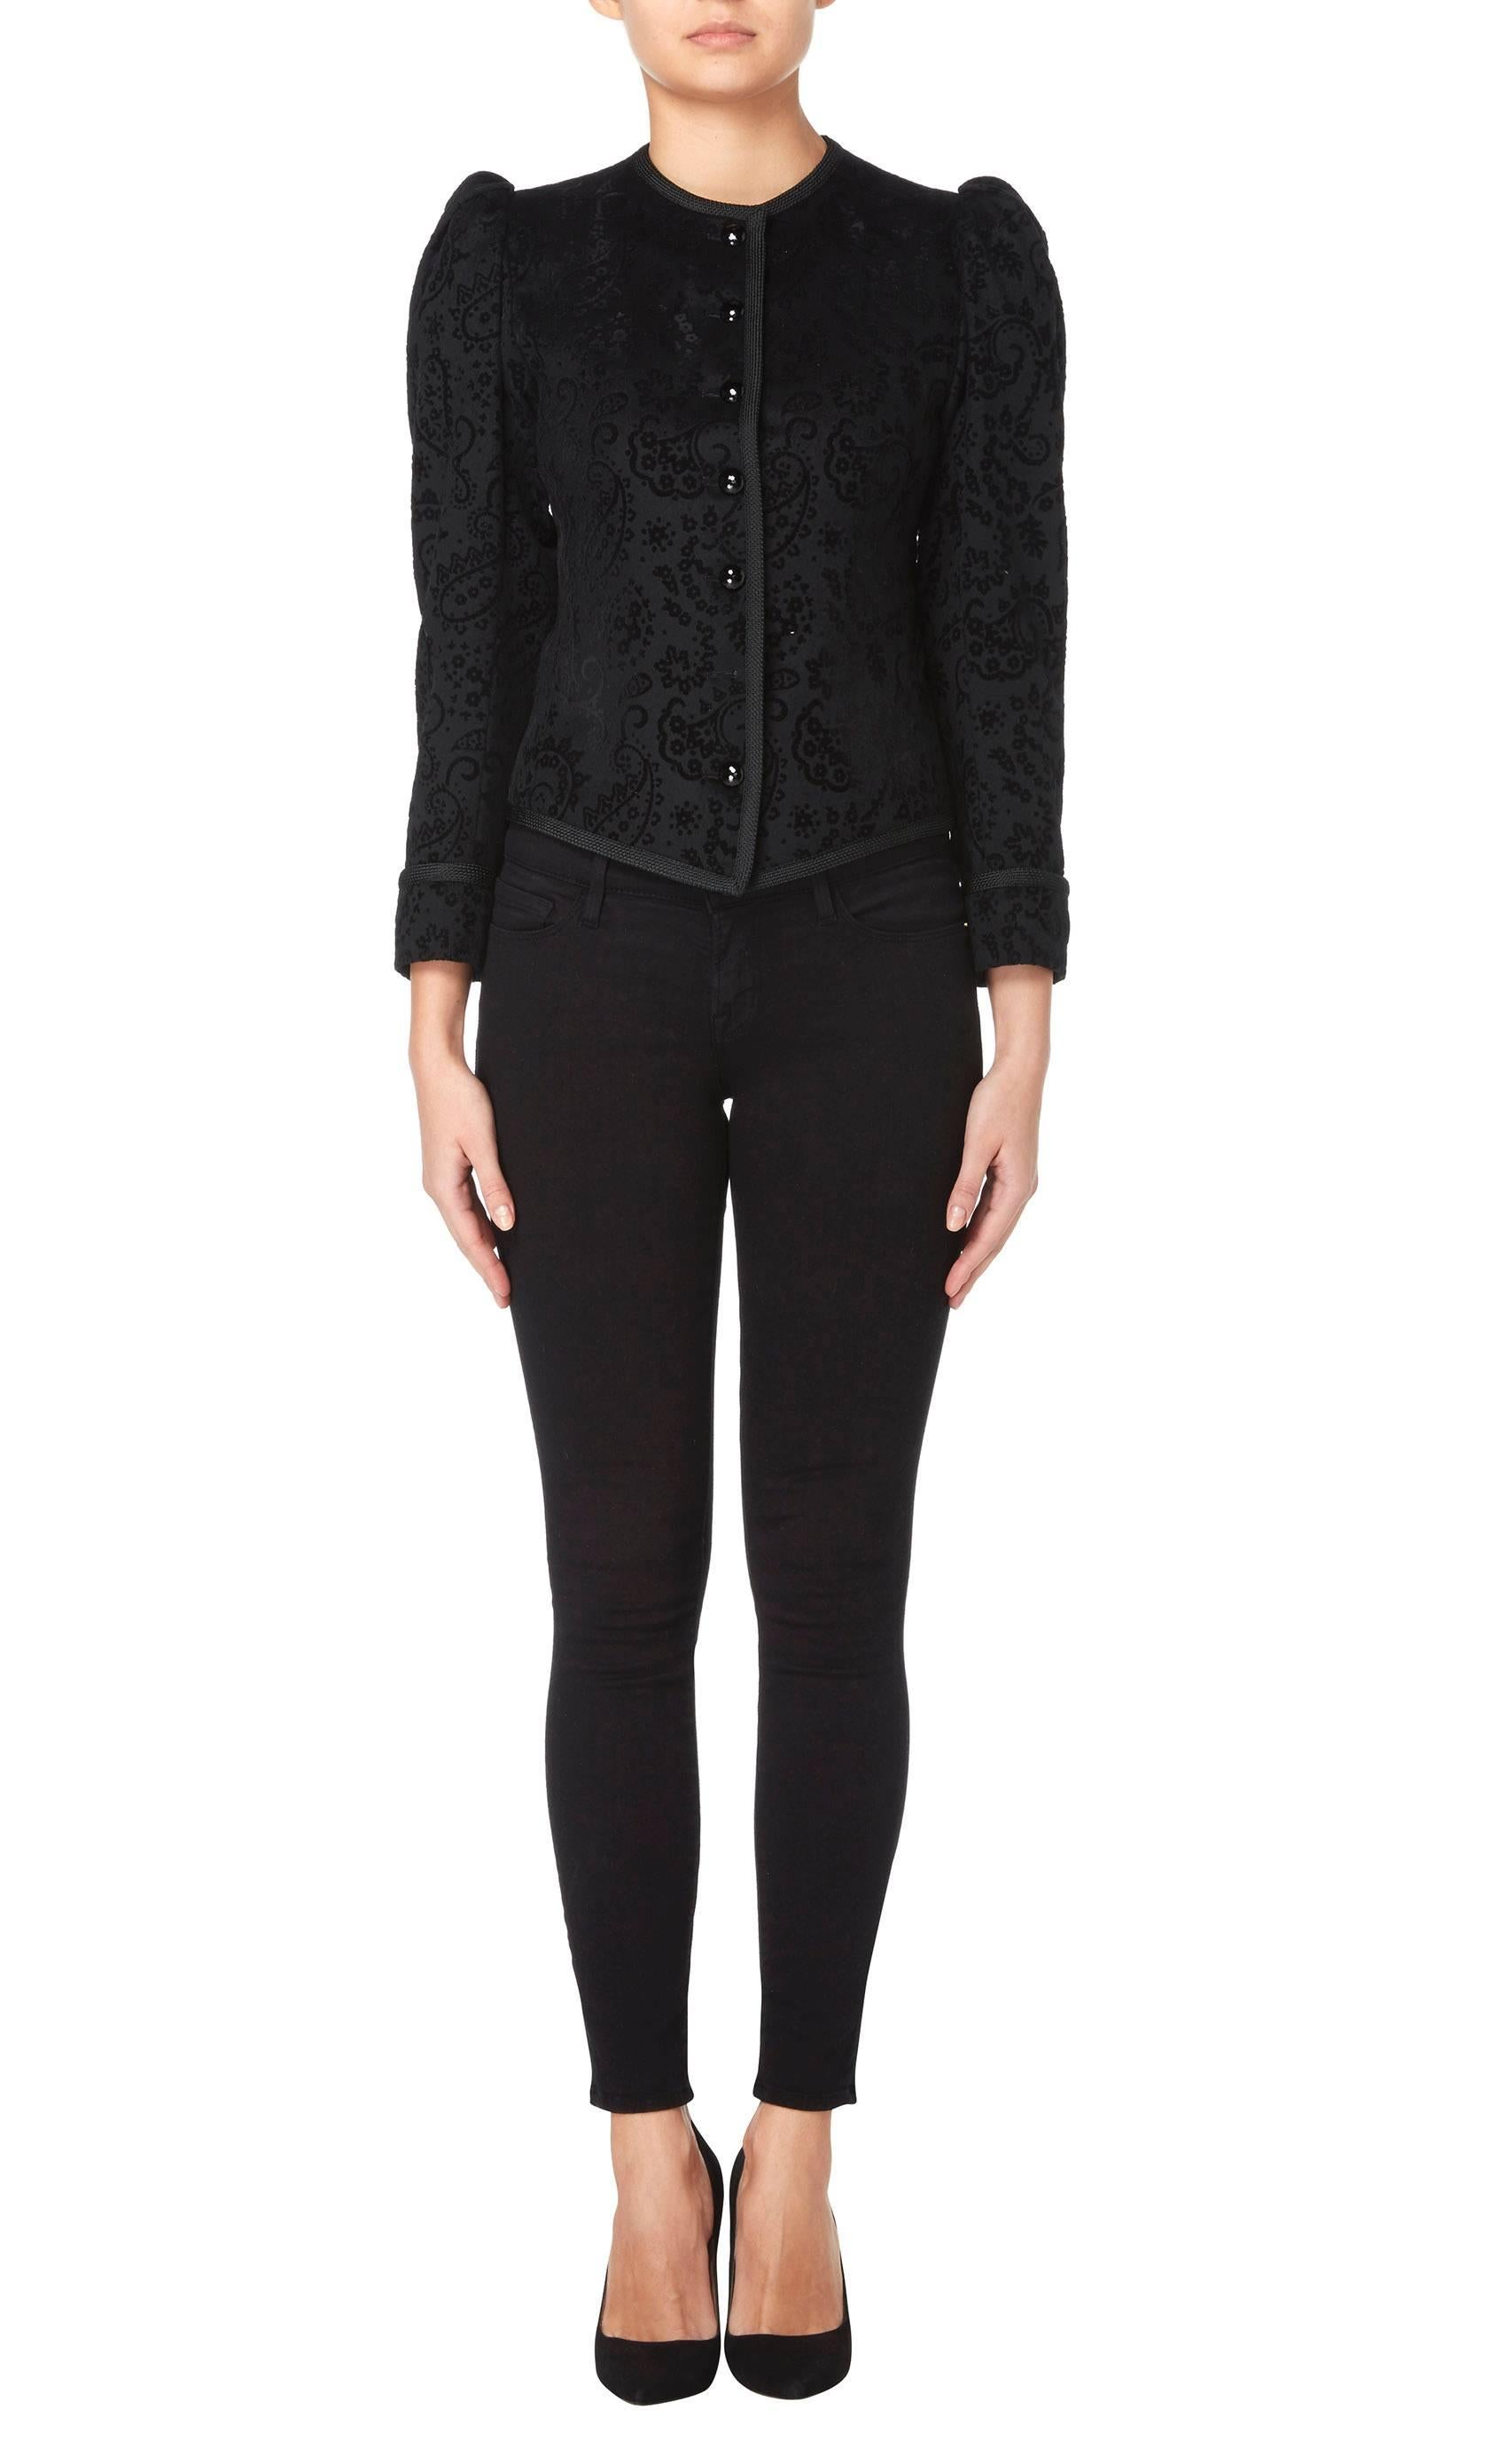 This Yves Saint Laurent jacket is a great way of introducing vintage into a contemporary wardrobe. Perfect for wearing with jeans and flats or with a cocktail dress for evenings, it is super versatile. Constructed in black wool with a flocked